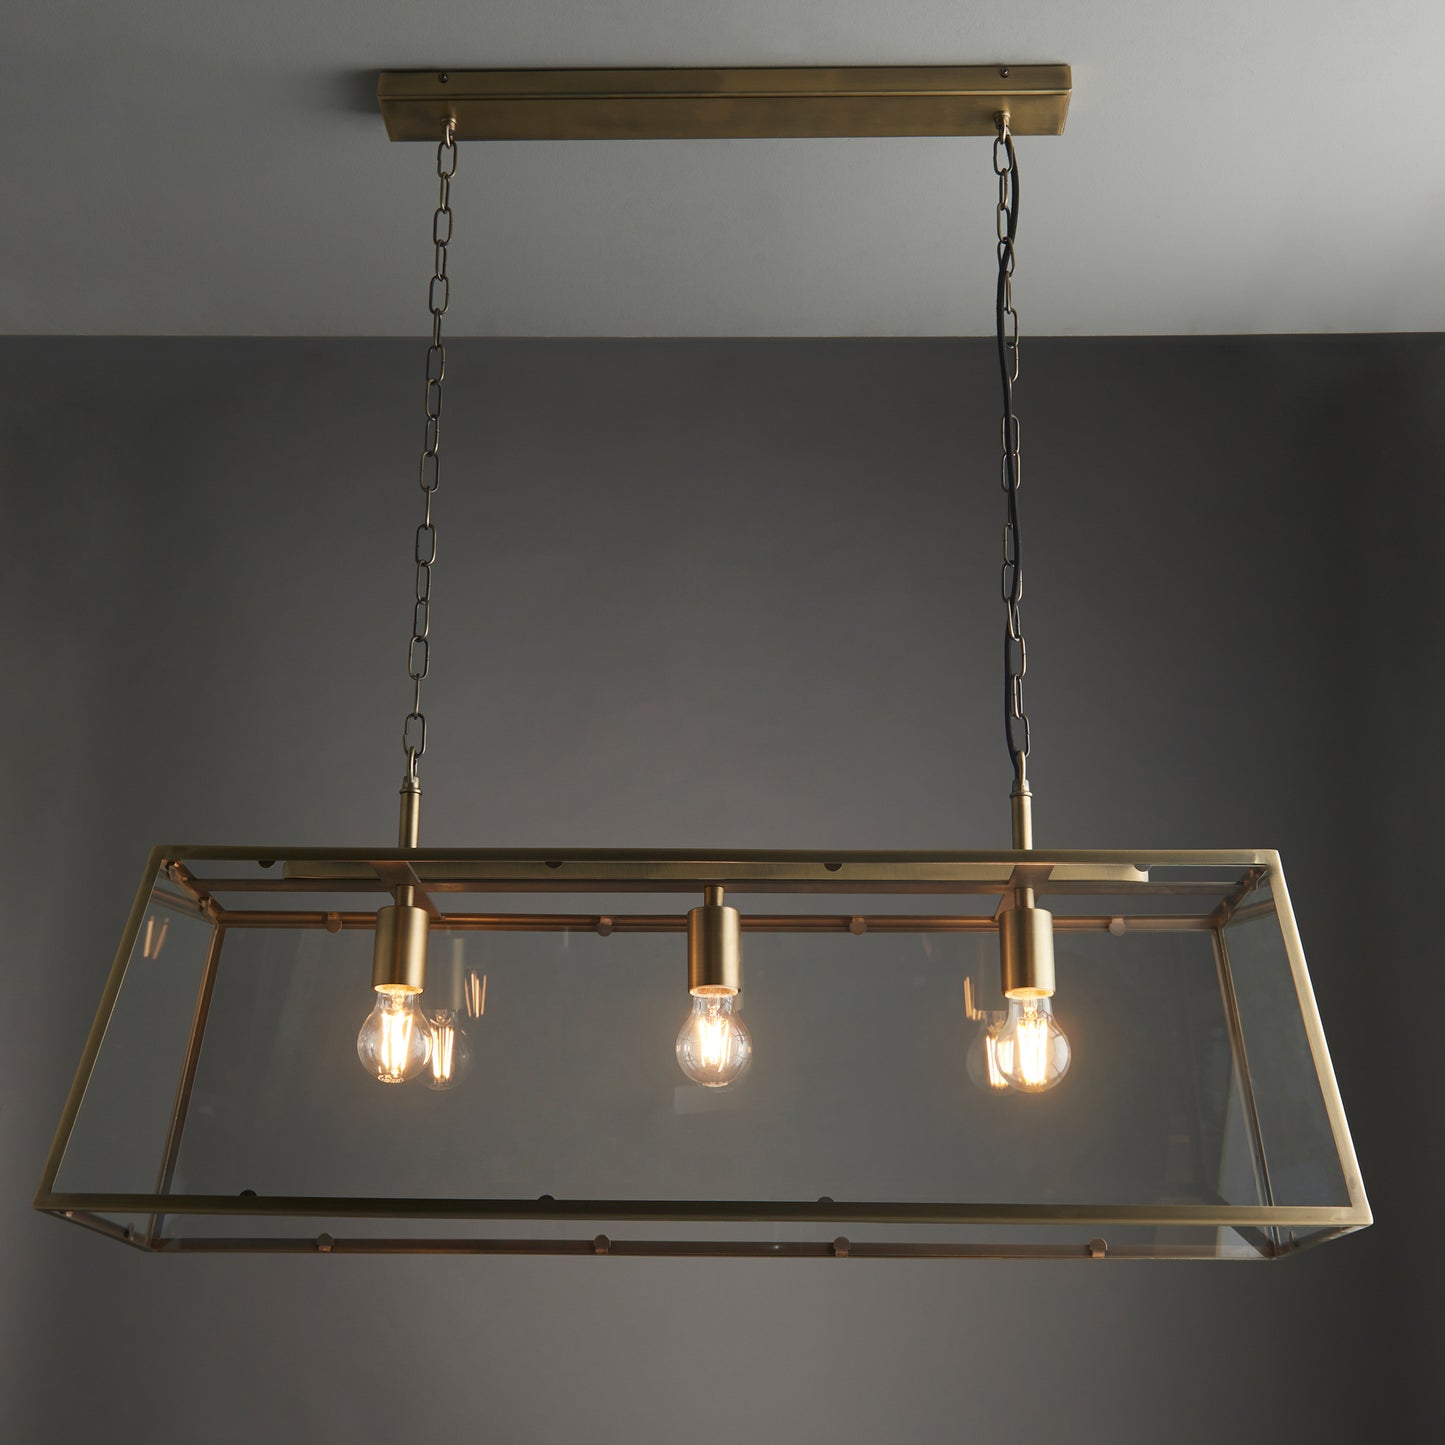 A Hurst 3 Pendant Light Antique Brass, perfect for interior decor and home furniture, featuring three hanging bulbs.